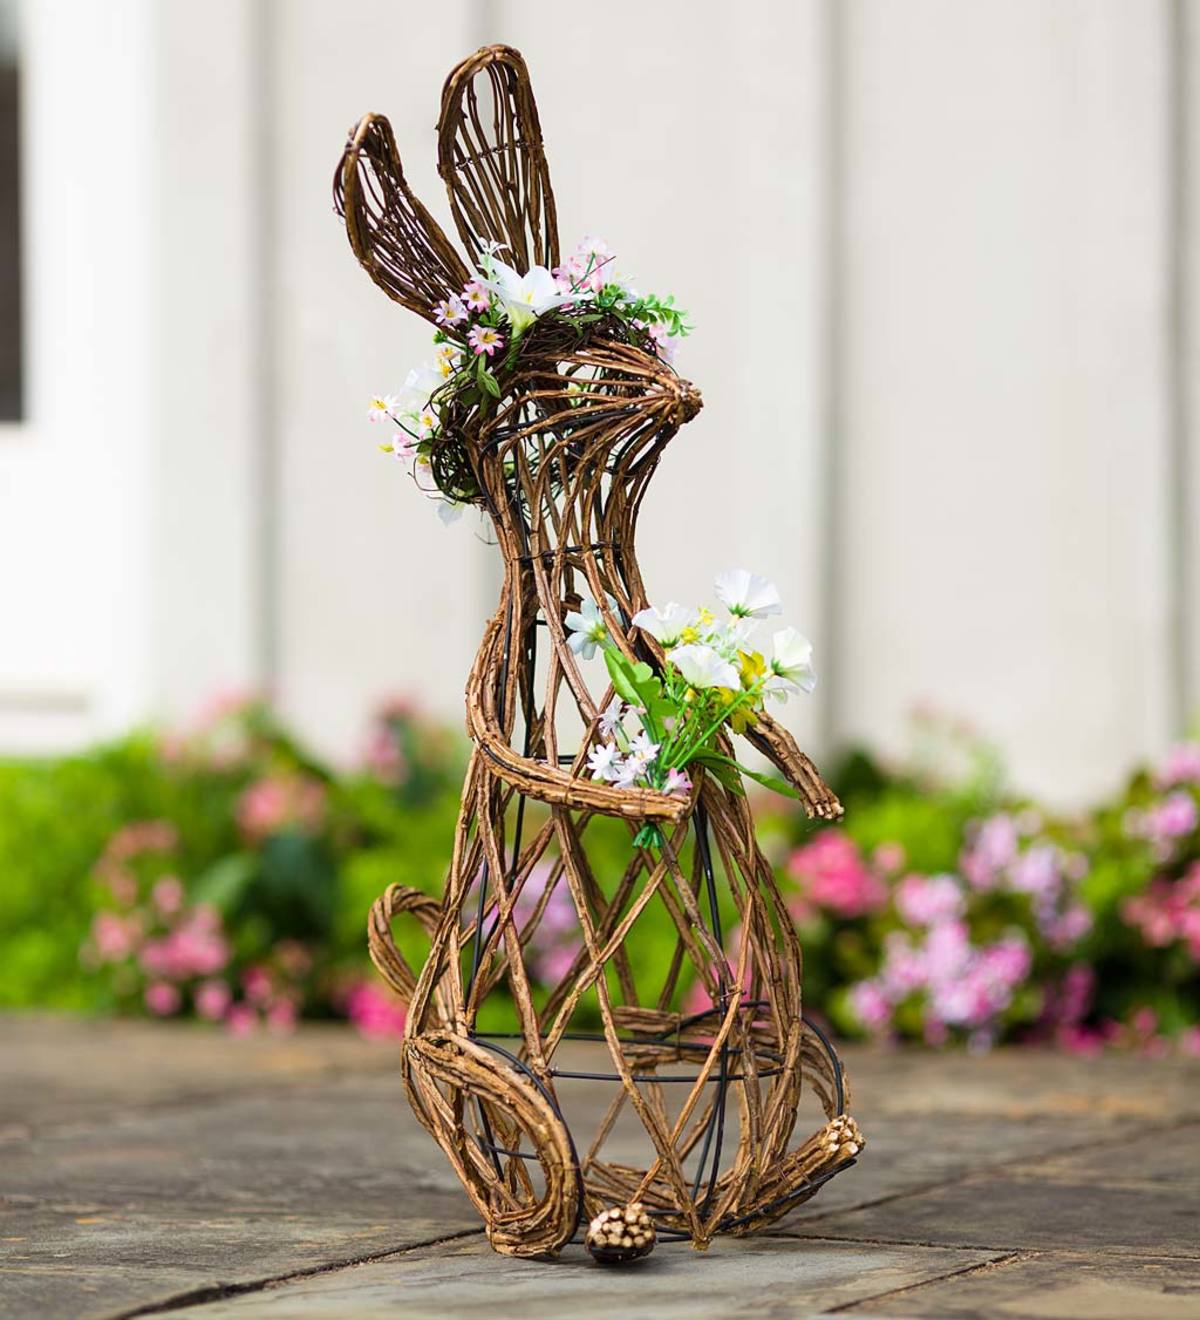 Rattan Garden Bunny Statue, Princess with Floral Crown